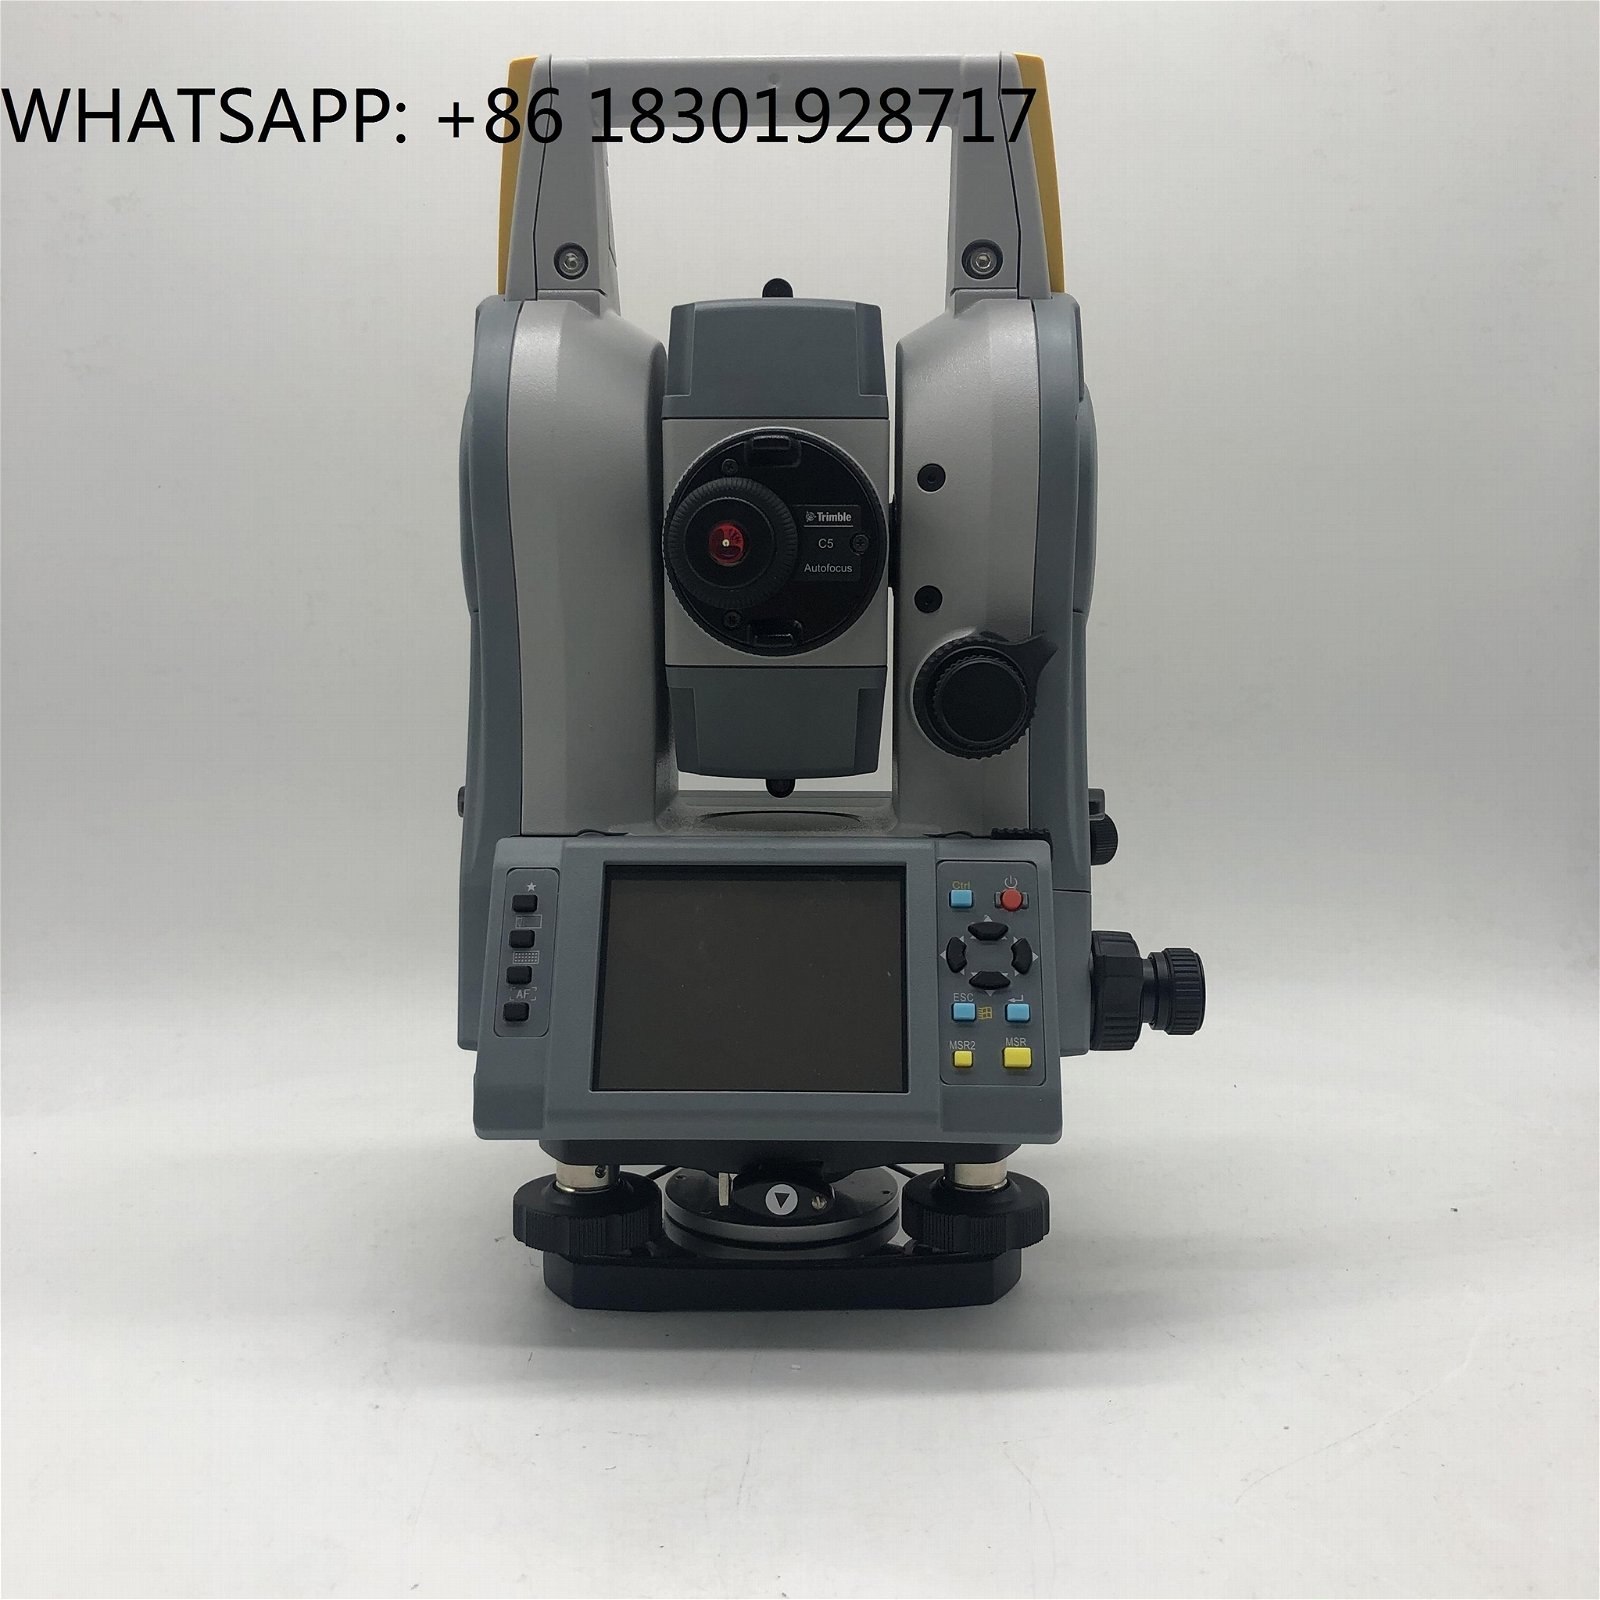 Trimble C5 Mechanical Total Station 1'' accuracy Reflectorless total station 